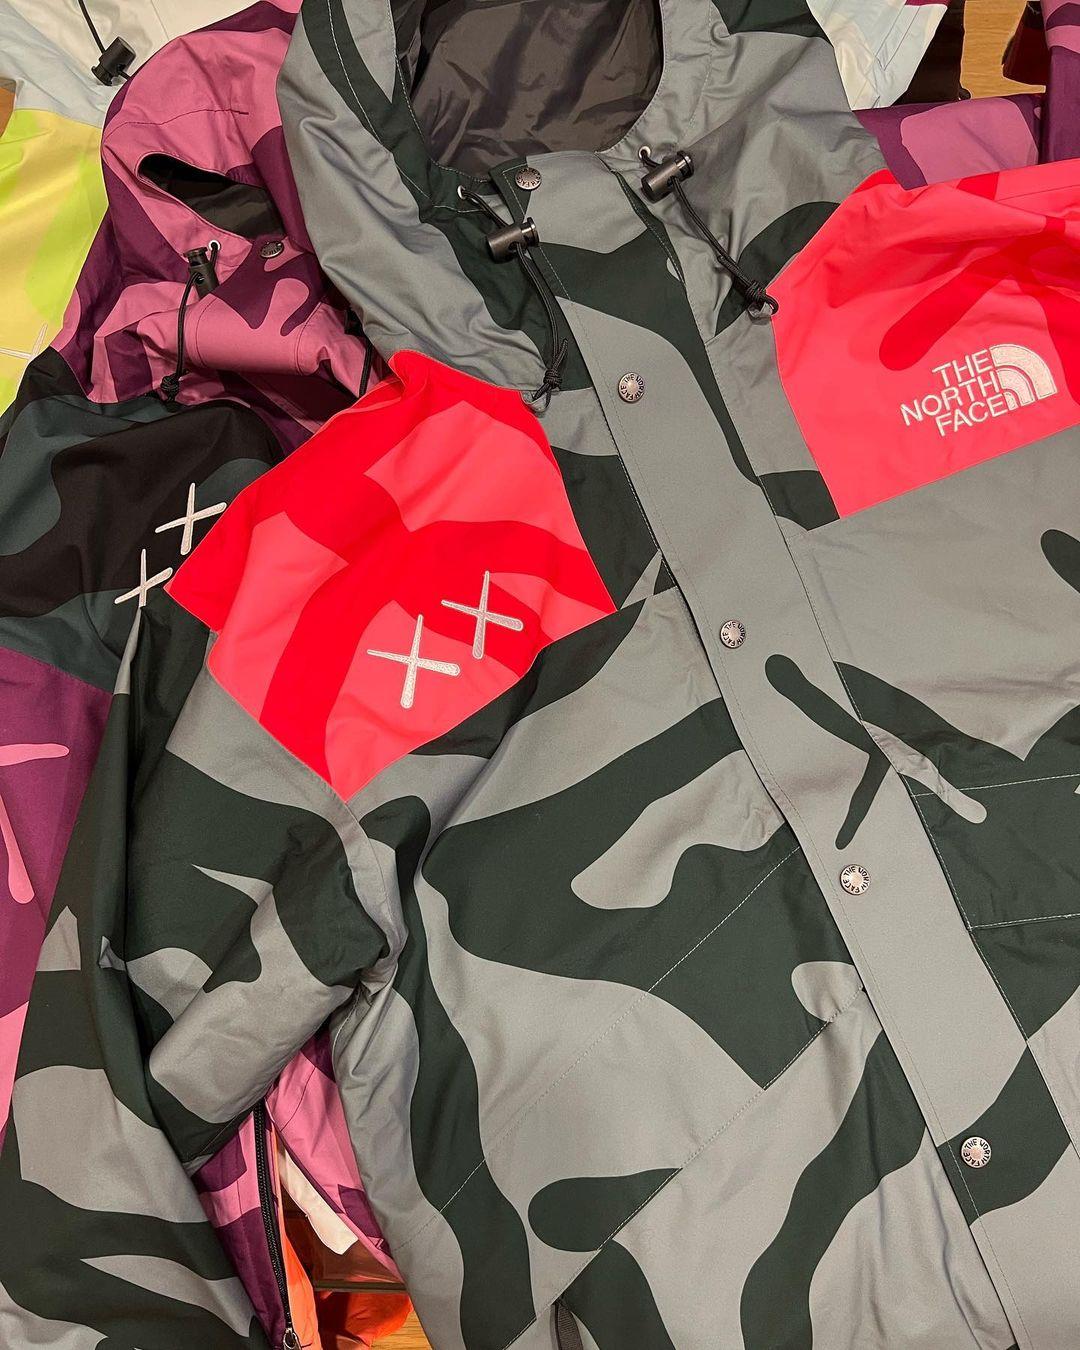 KAWS x The North Face collab 2022